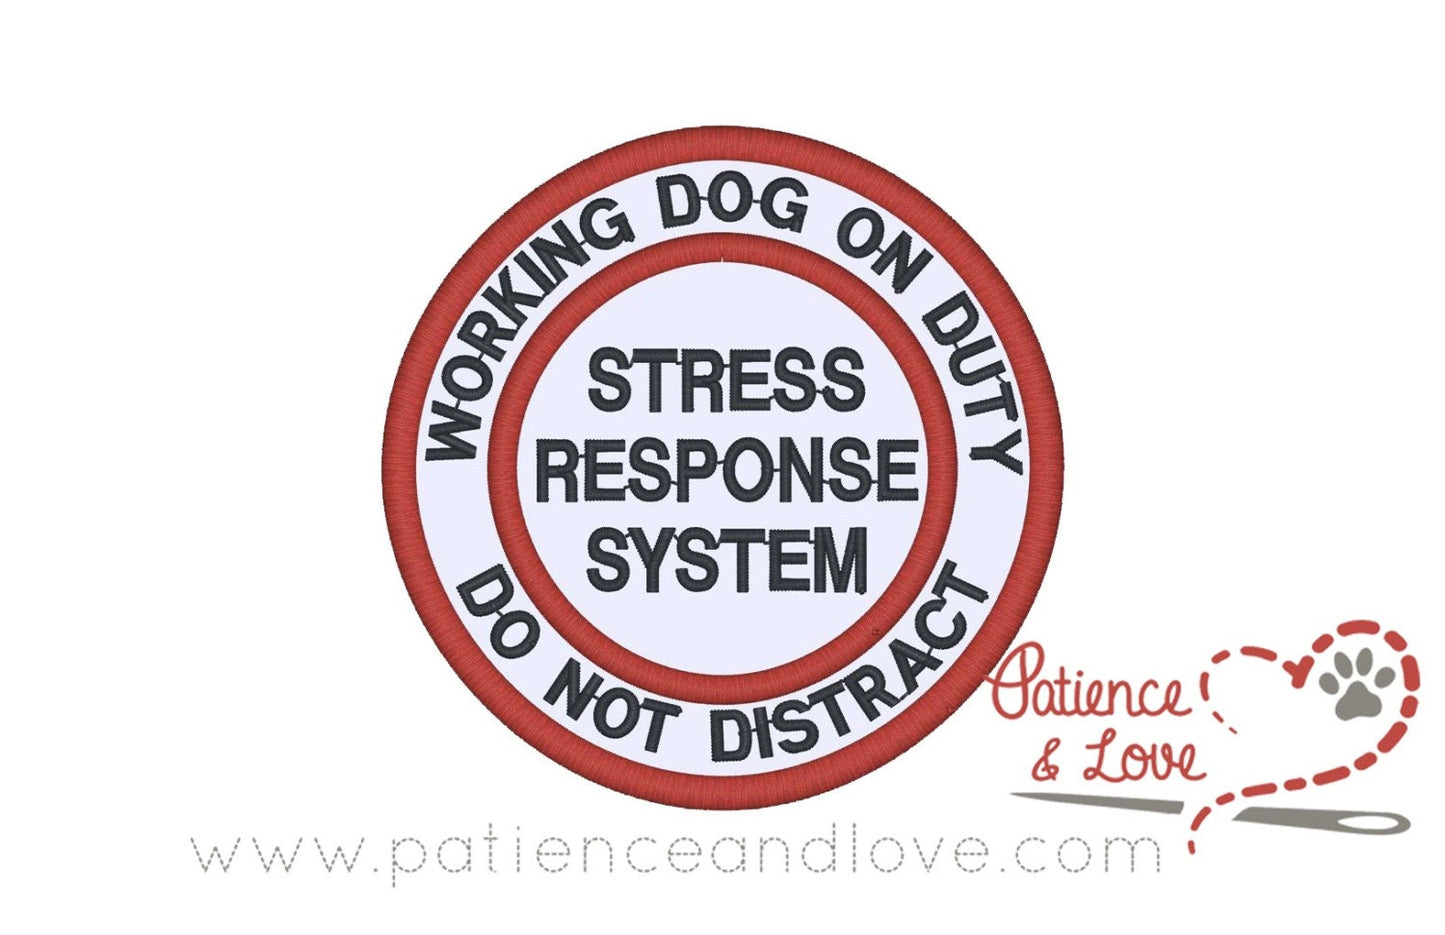 Stress response system, working dog on duty, do not distract, 3 inch round patch